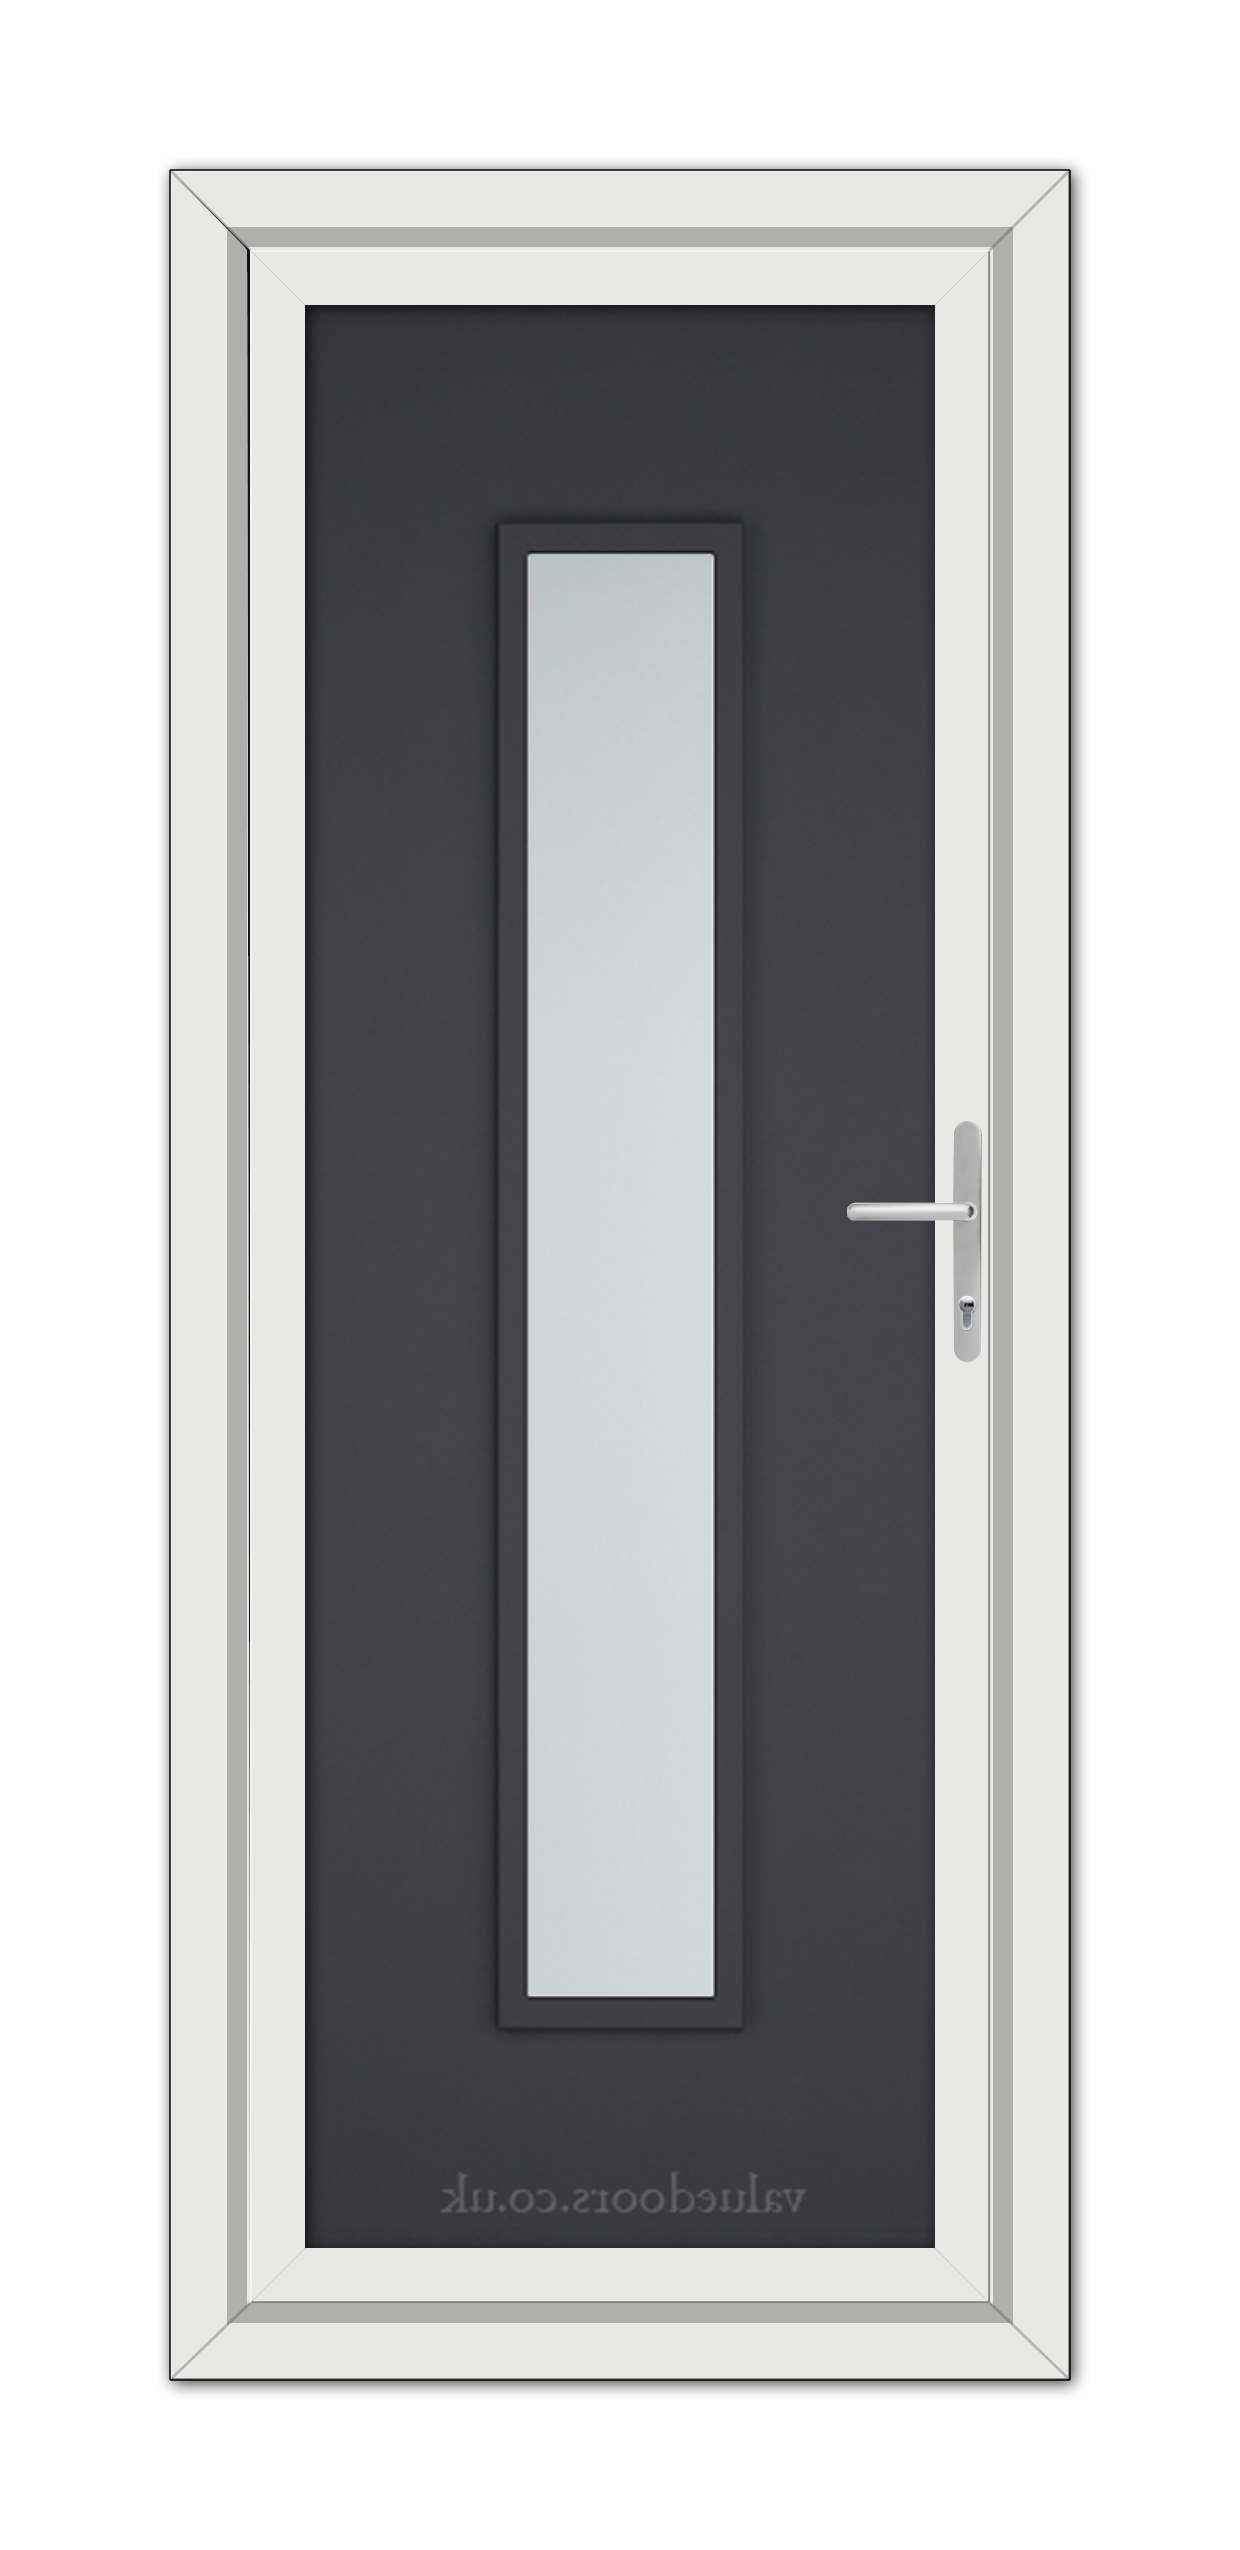 A Grey Modern 5101 uPVC door with a vertical glass panel, steel handle, and minimalist design, framed in white.